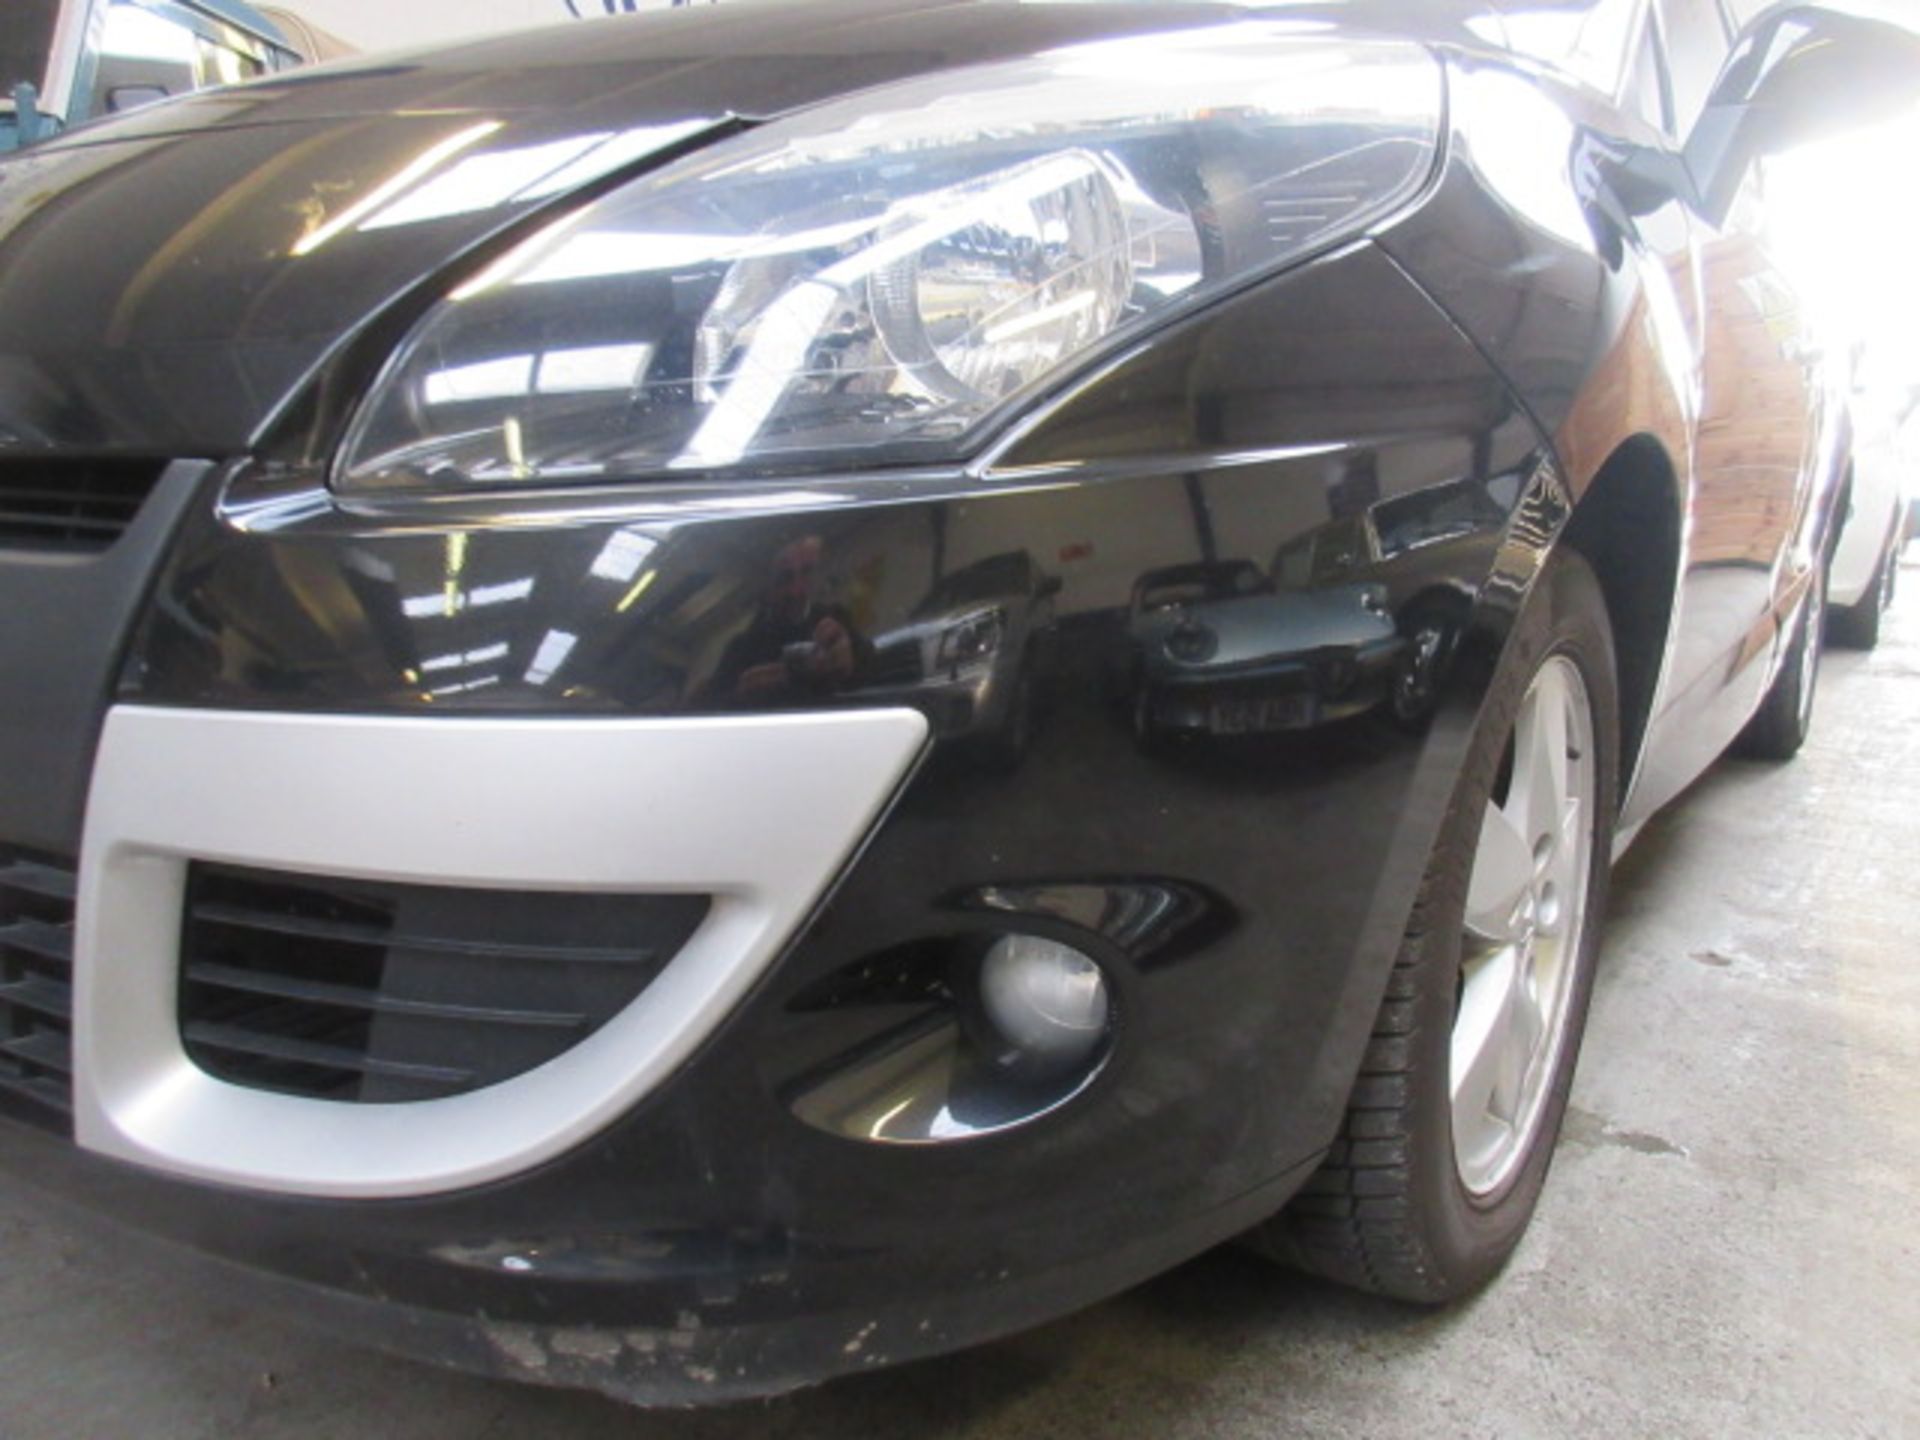 59 09 Renault Scenic Dyn VVT - Image 5 of 24